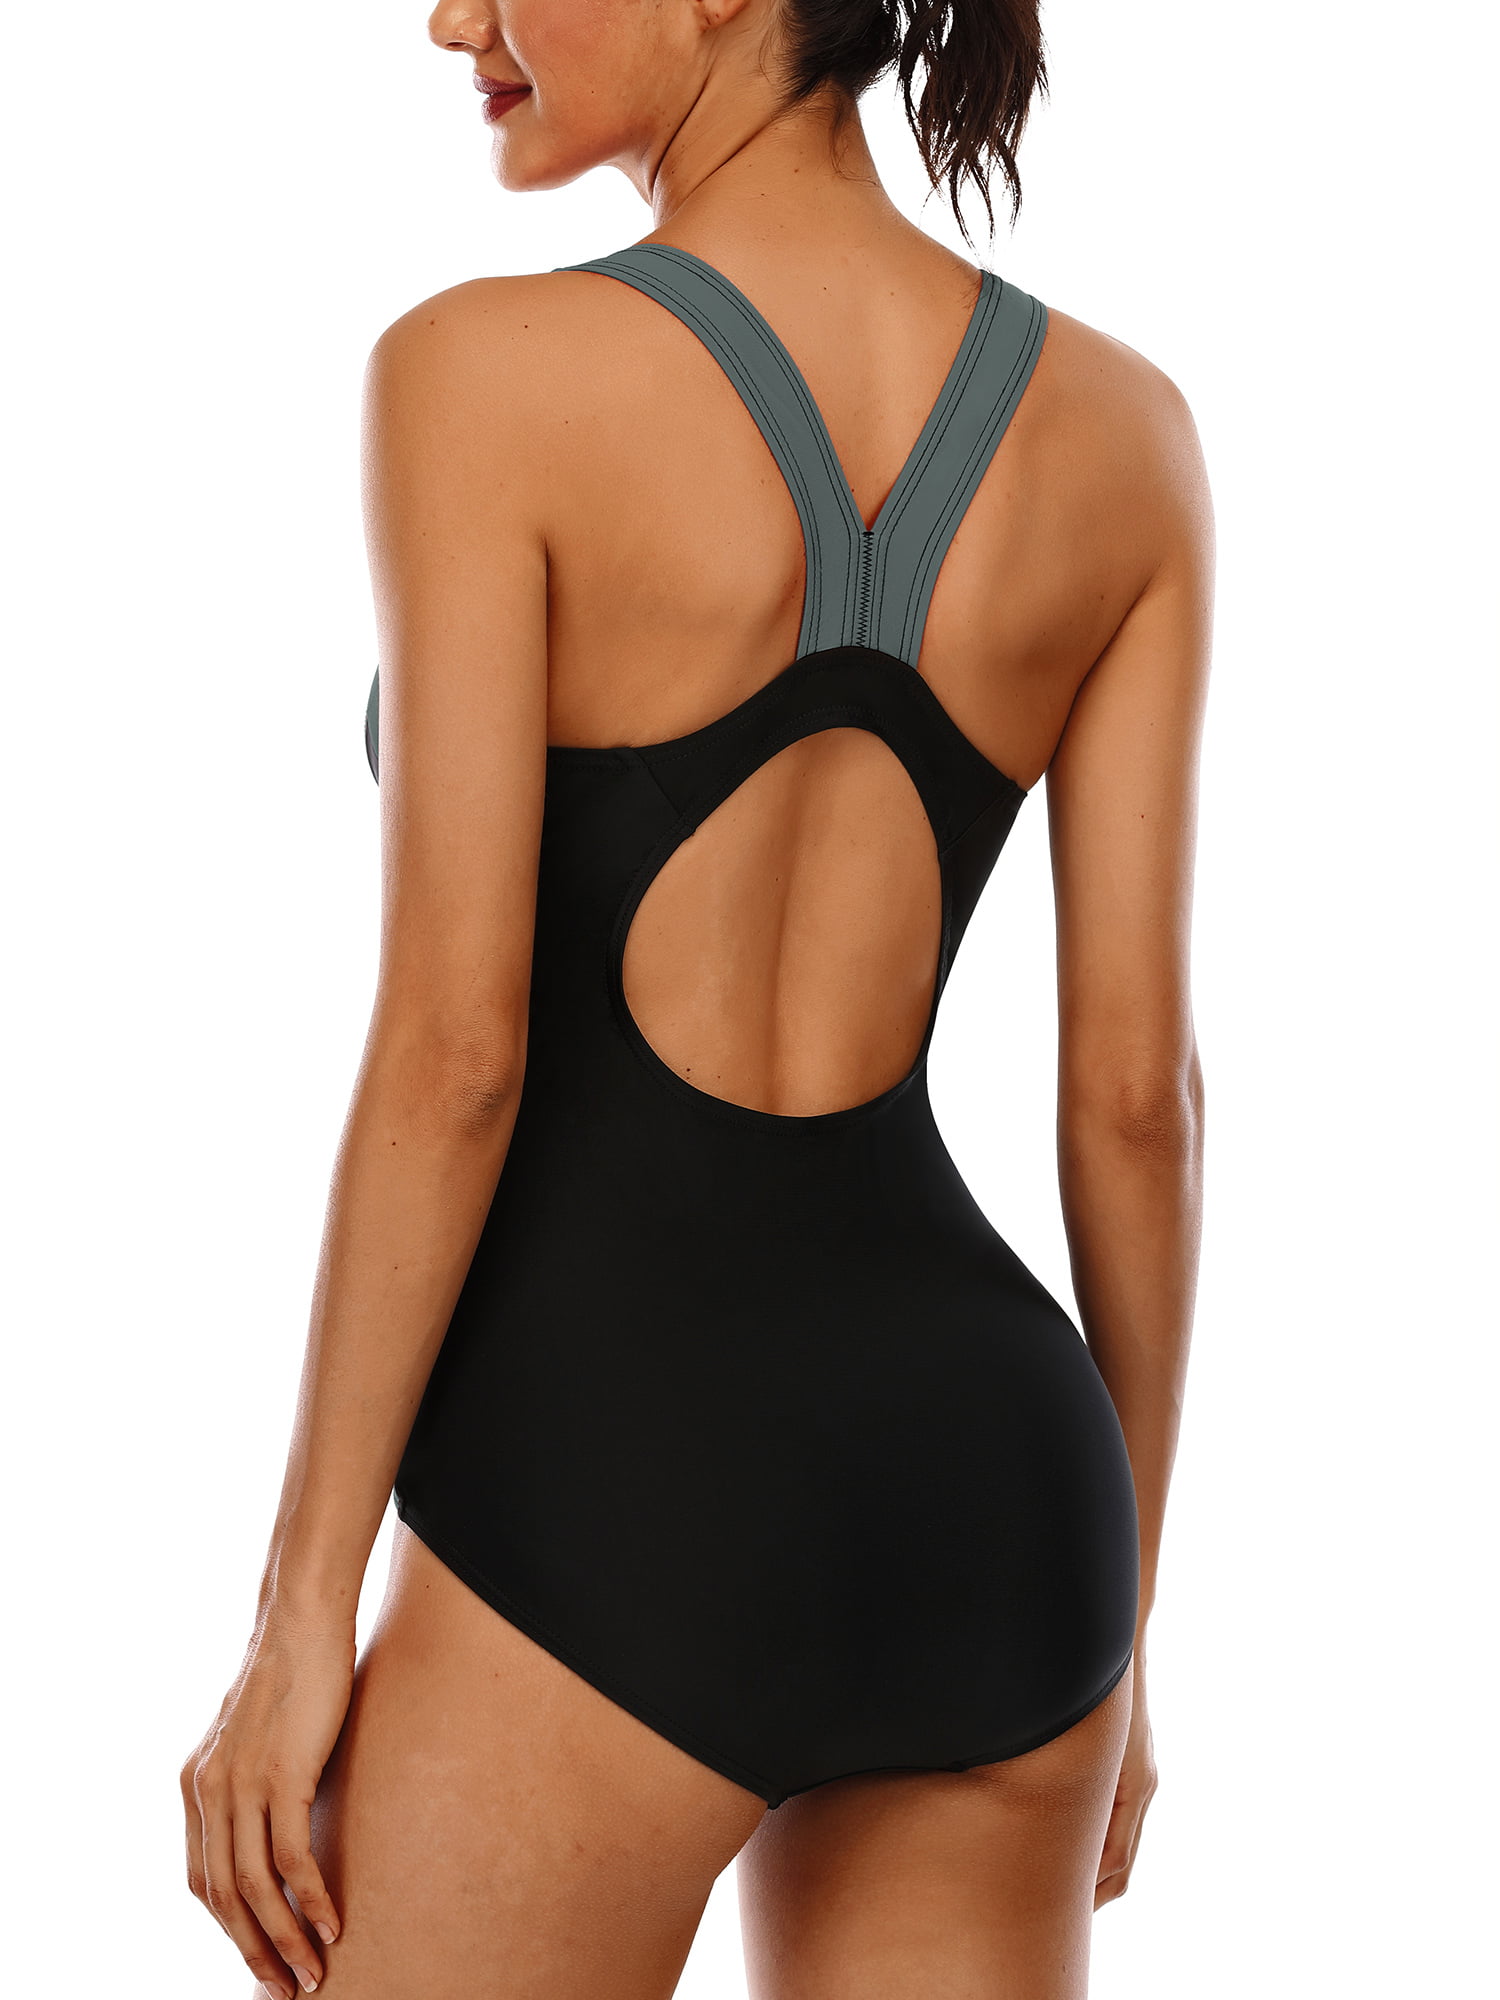 Asoul One Piece Swimsuit for Womens Athletic Swimwear Tummy